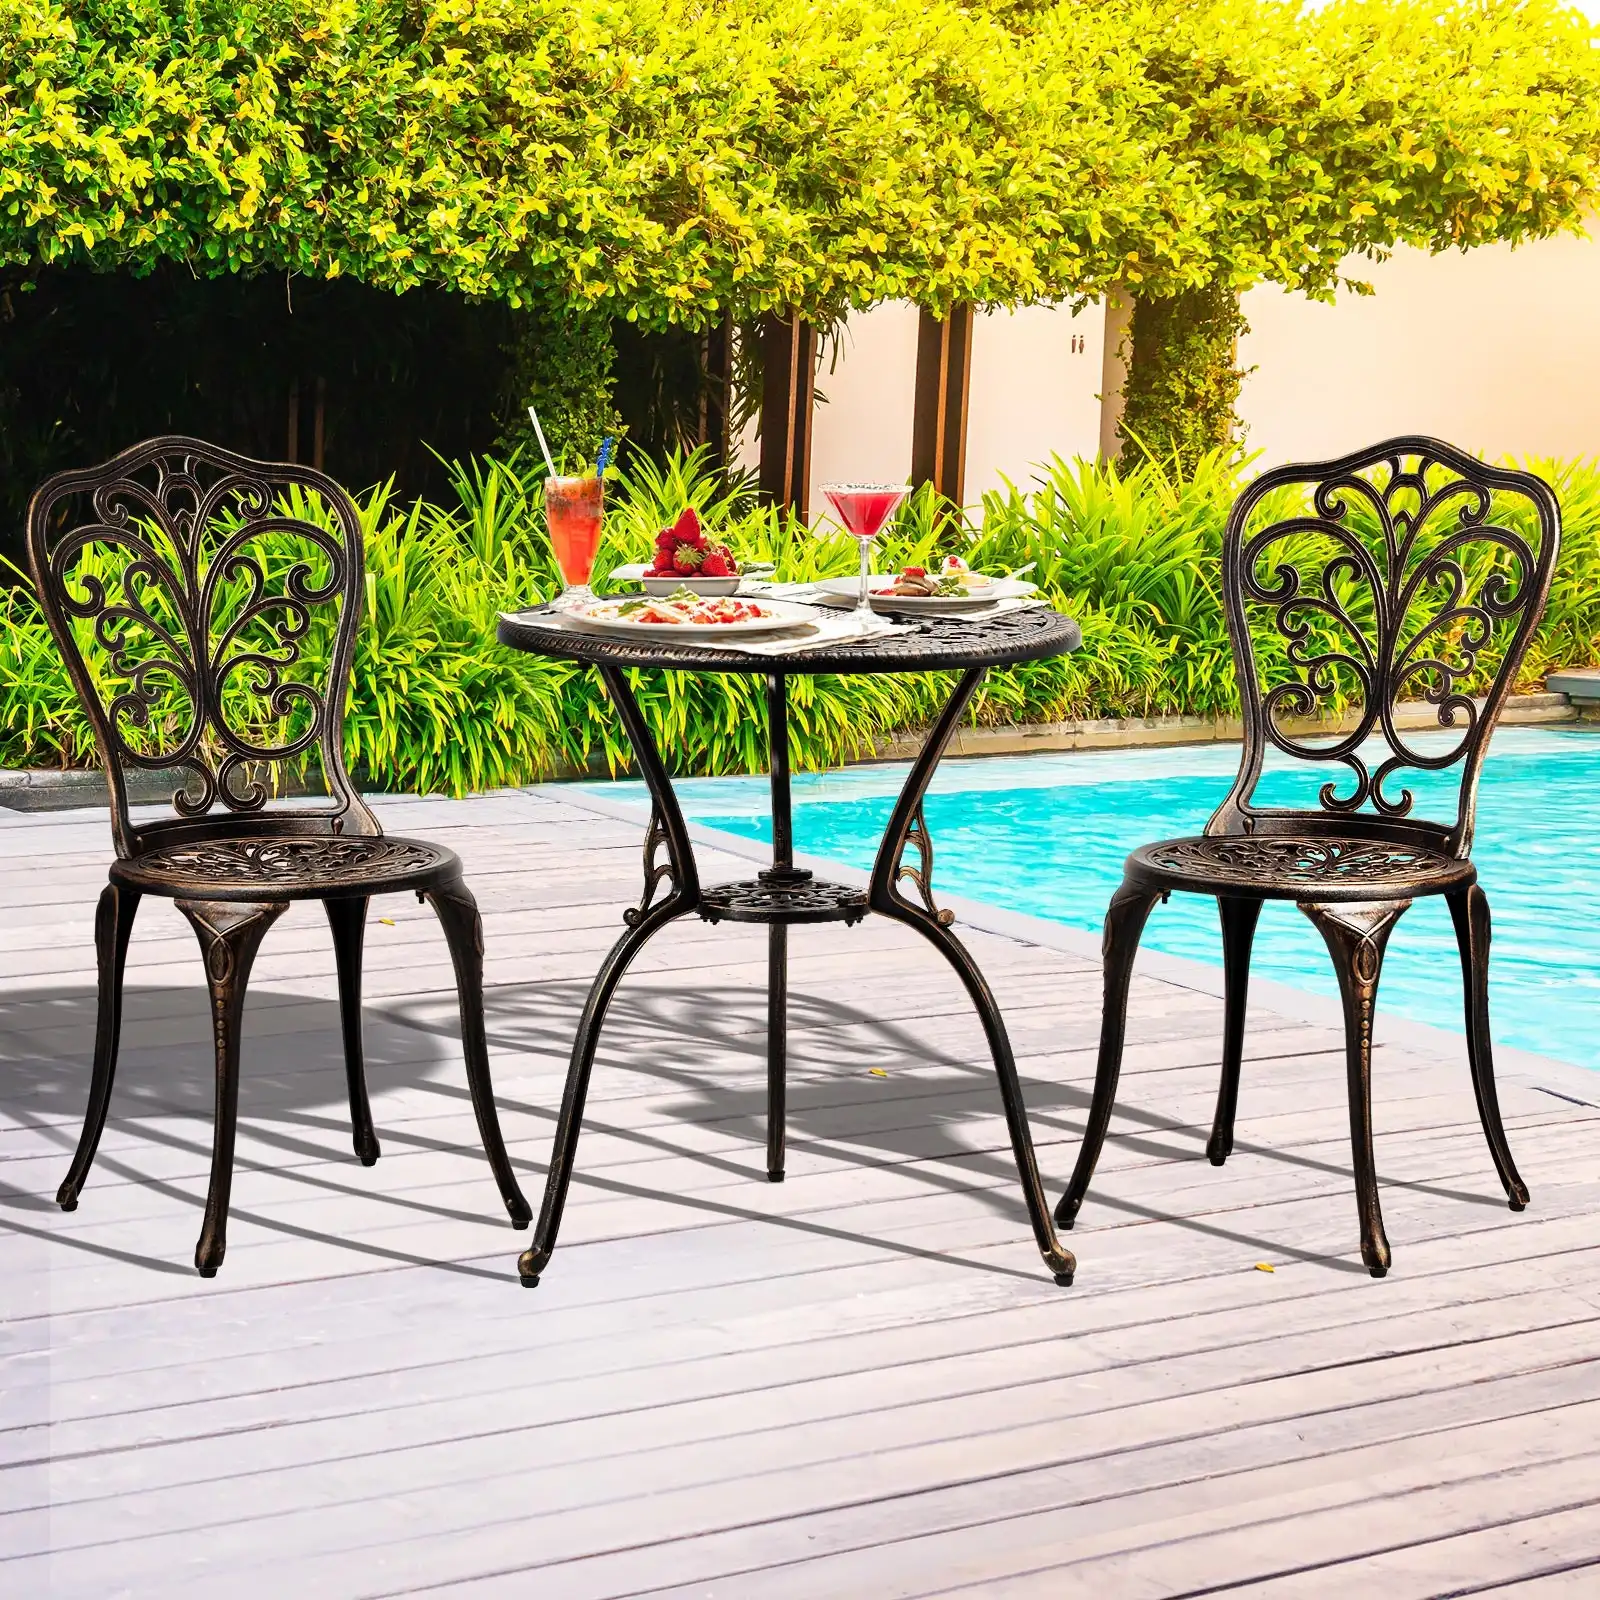 Livsip Bistro Furniture Setting 3 Piece Chairs Table Patio Indoor/Outdoor Set